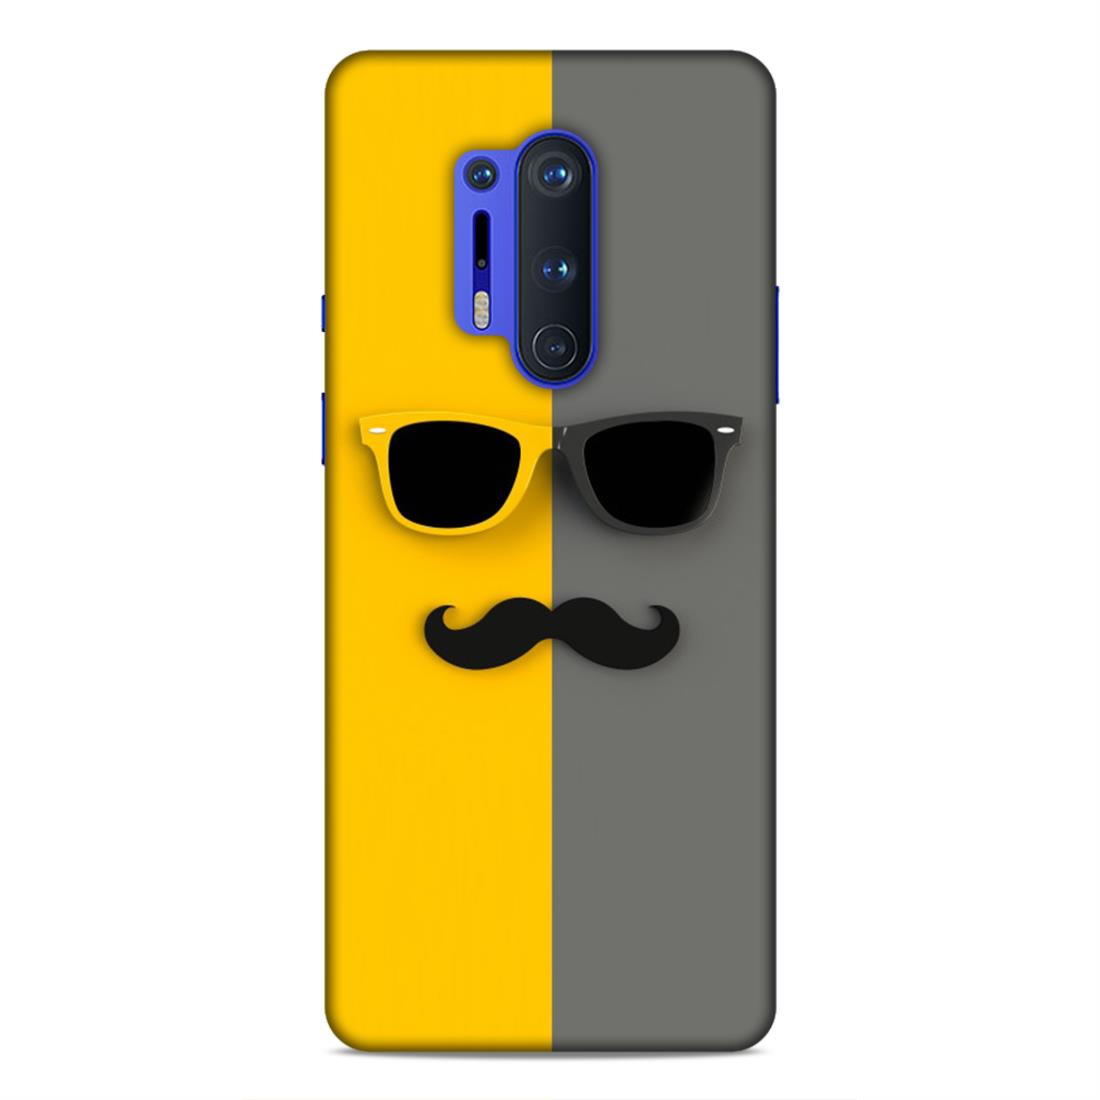 Spect and Mustache Hard Back Case For OnePlus 8 Pro